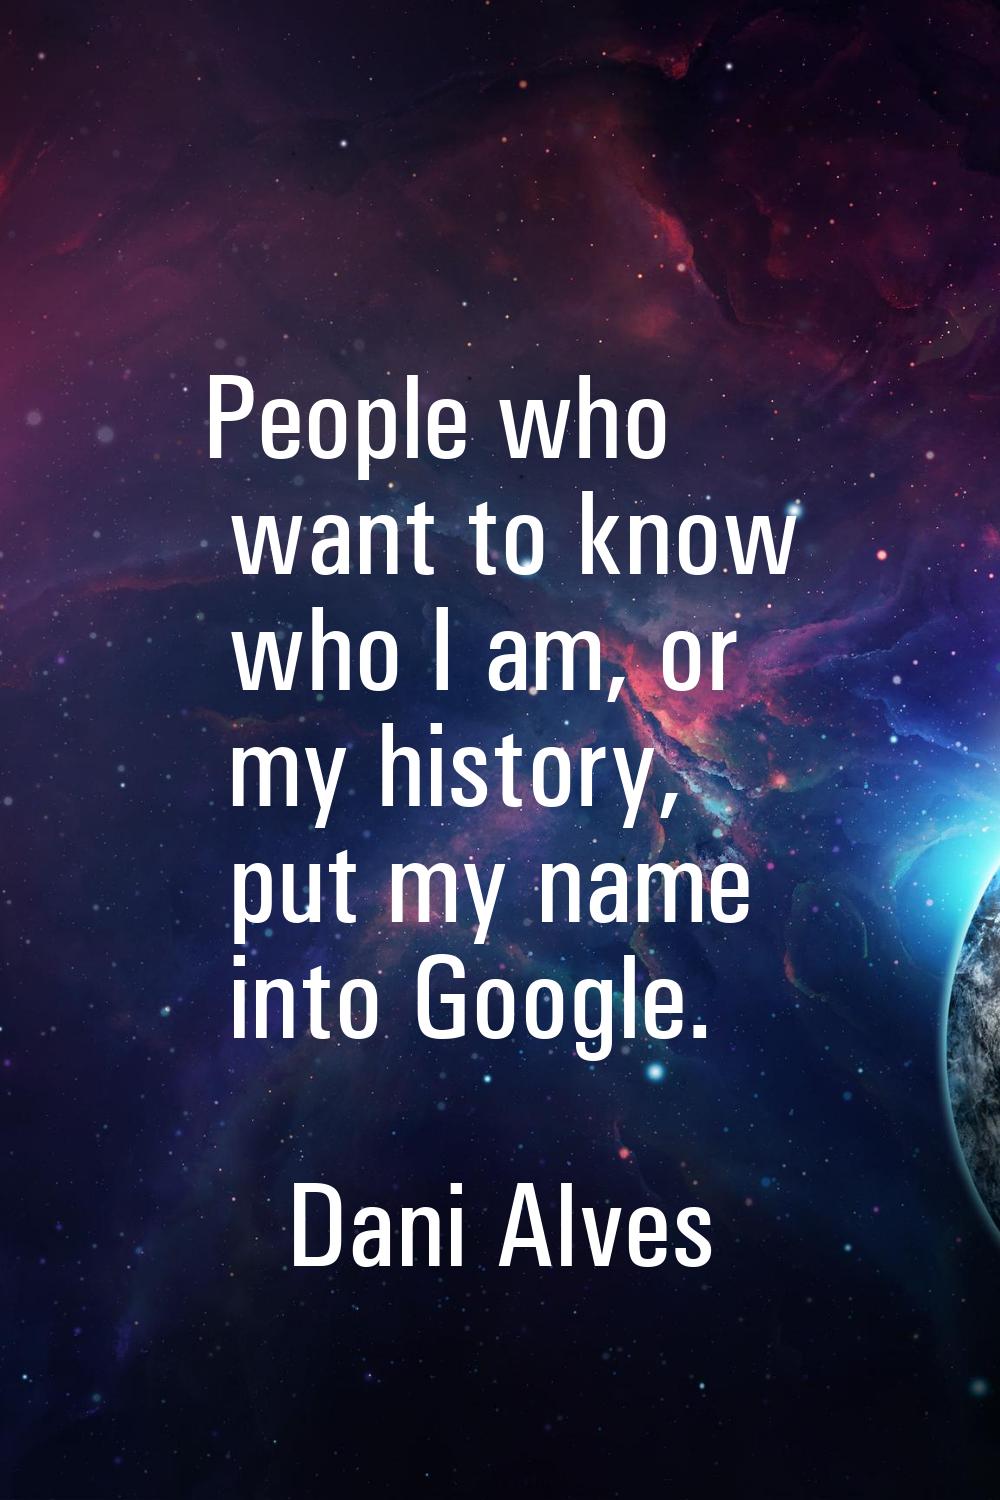 People who want to know who I am, or my history, put my name into Google.